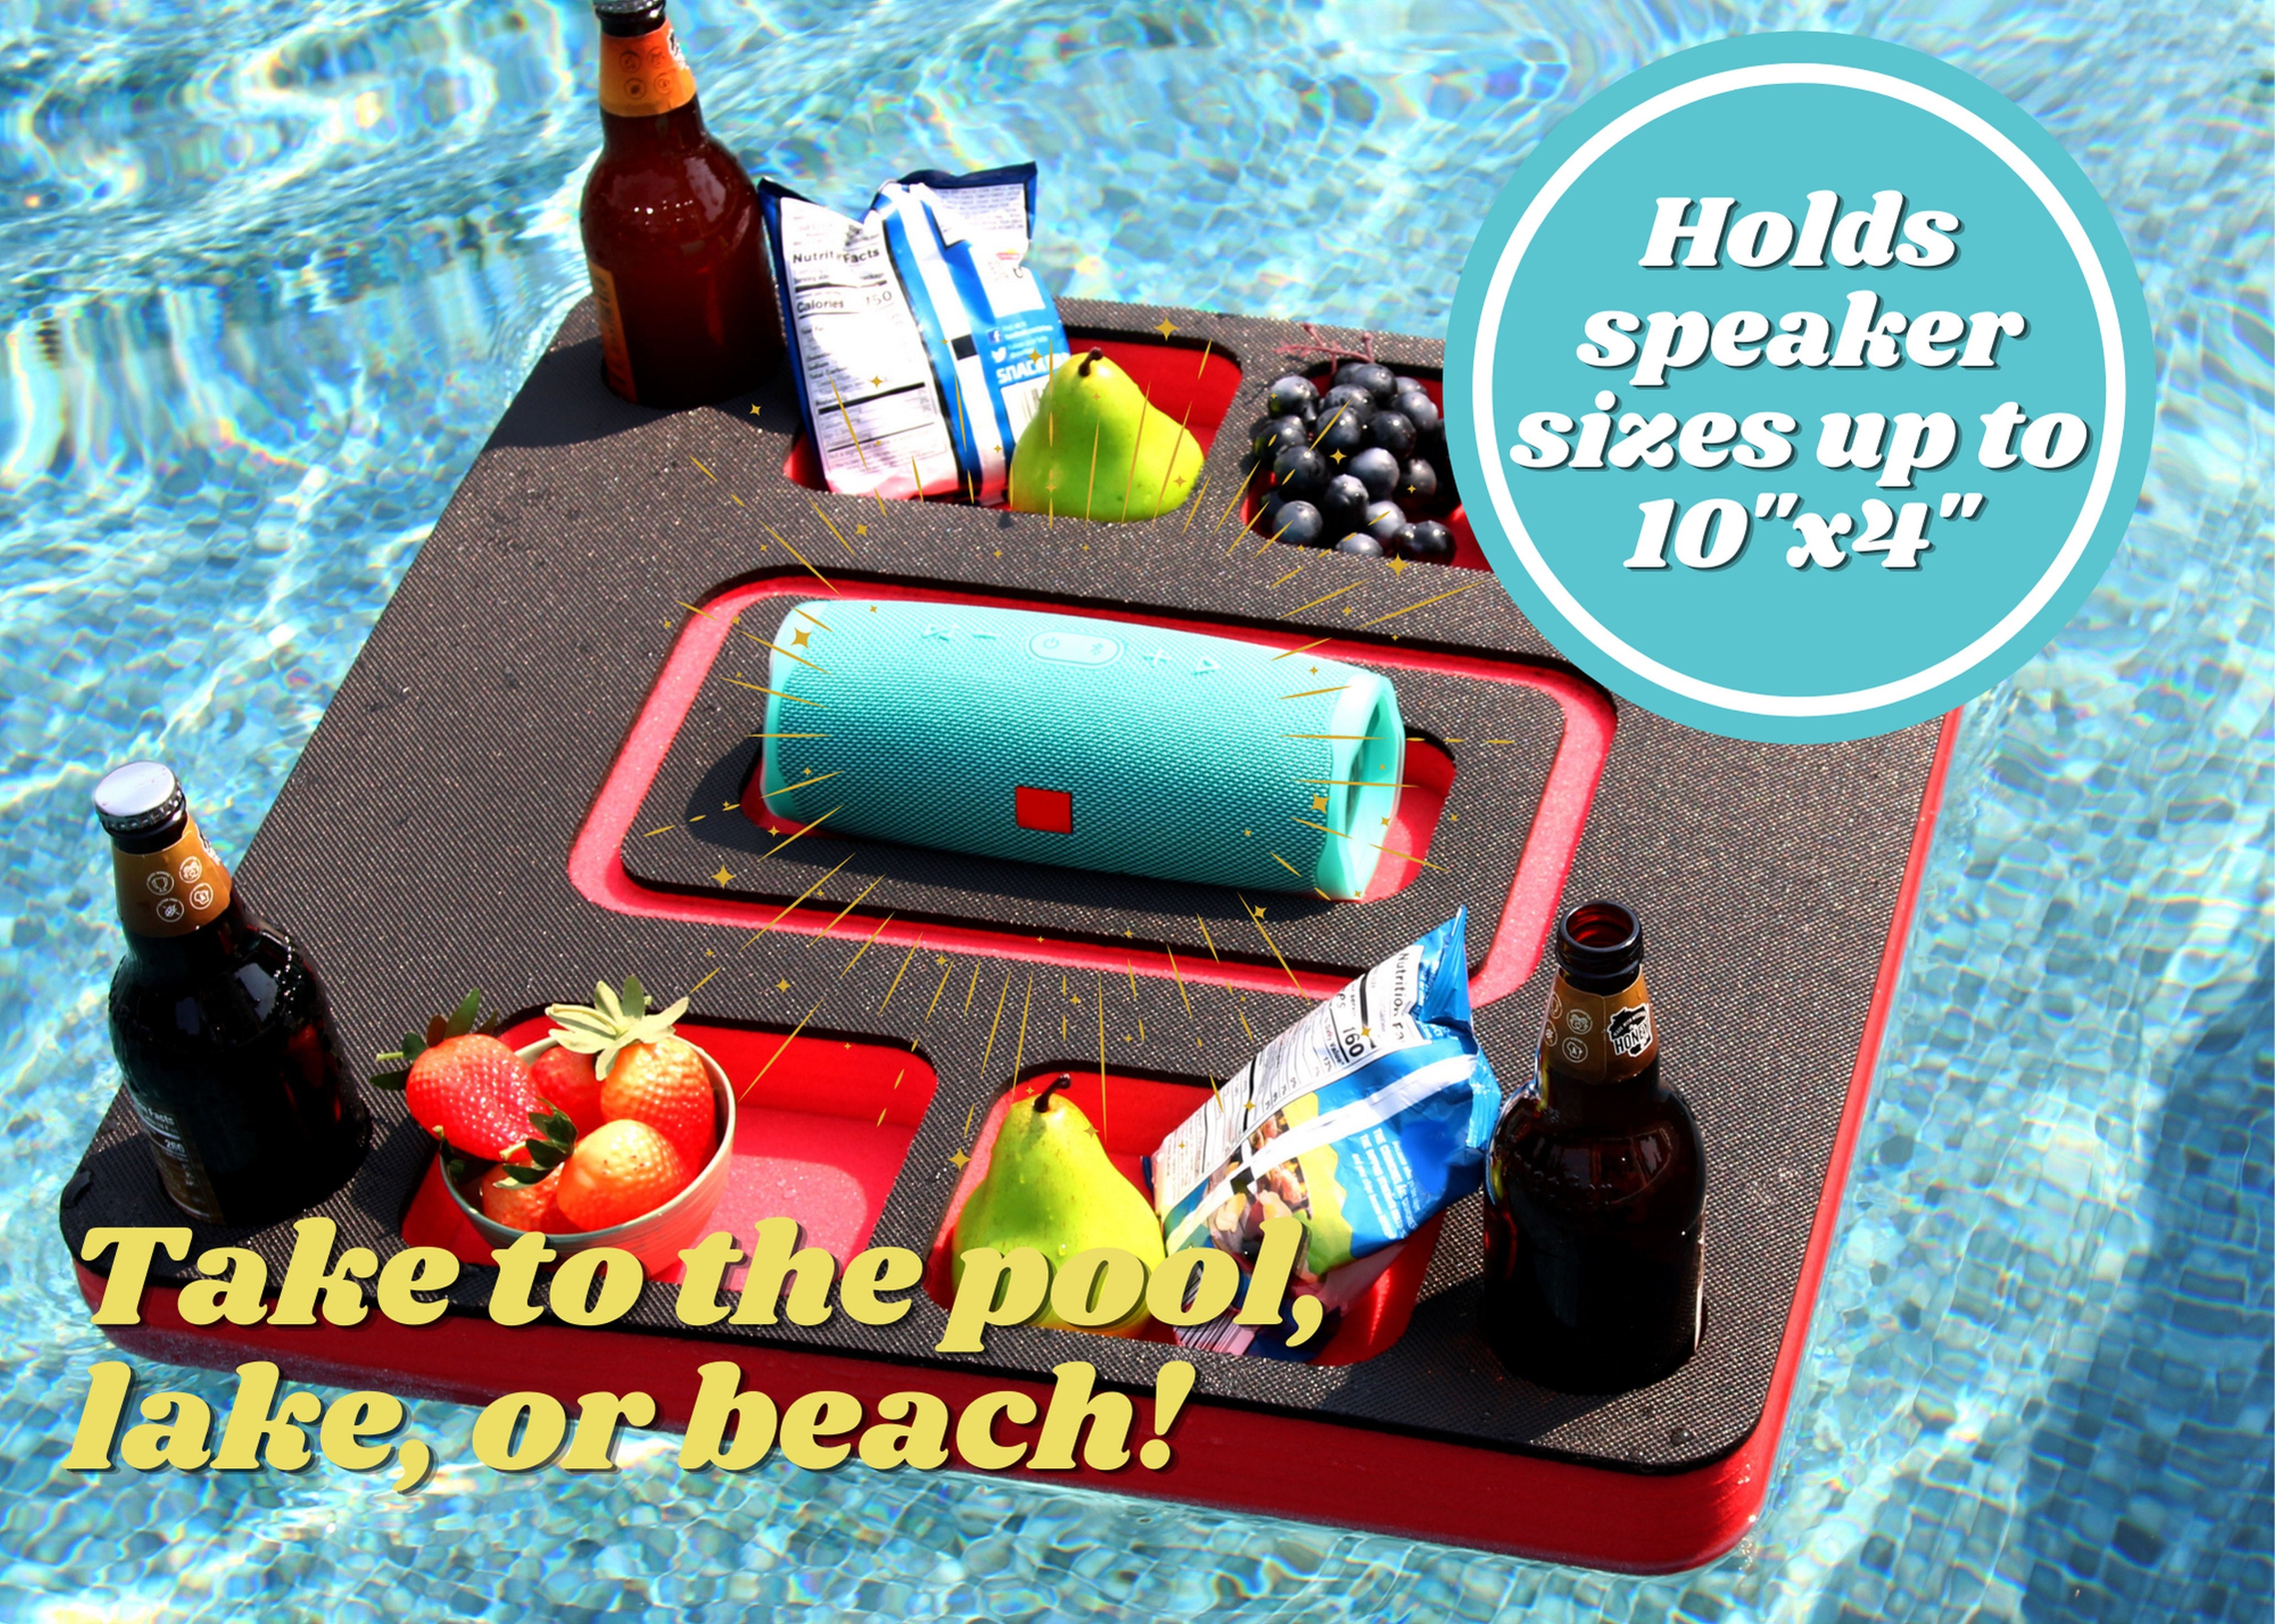 Waterproof Speaker Table Tray Drink Holders for Pool Beach Float Durable Foam UV Resistant Compatible JBL tooth Charge FLIP more 23.75 Inch